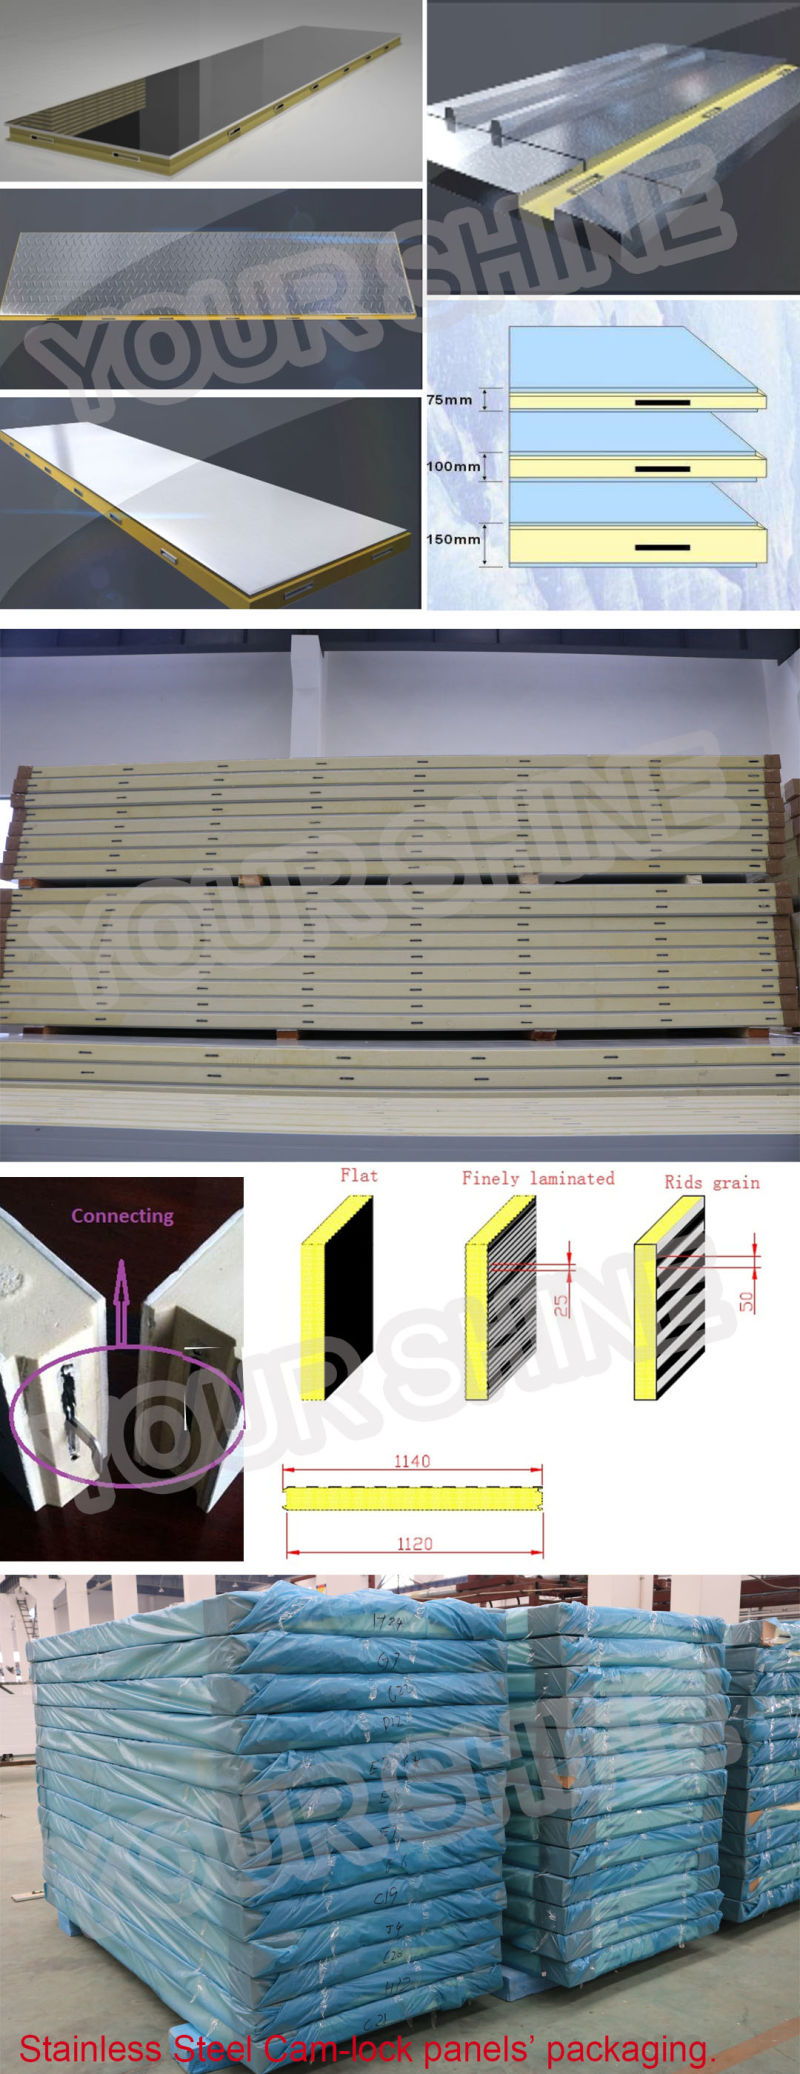 Insulation Sandwich PUR Panels for Cold Room